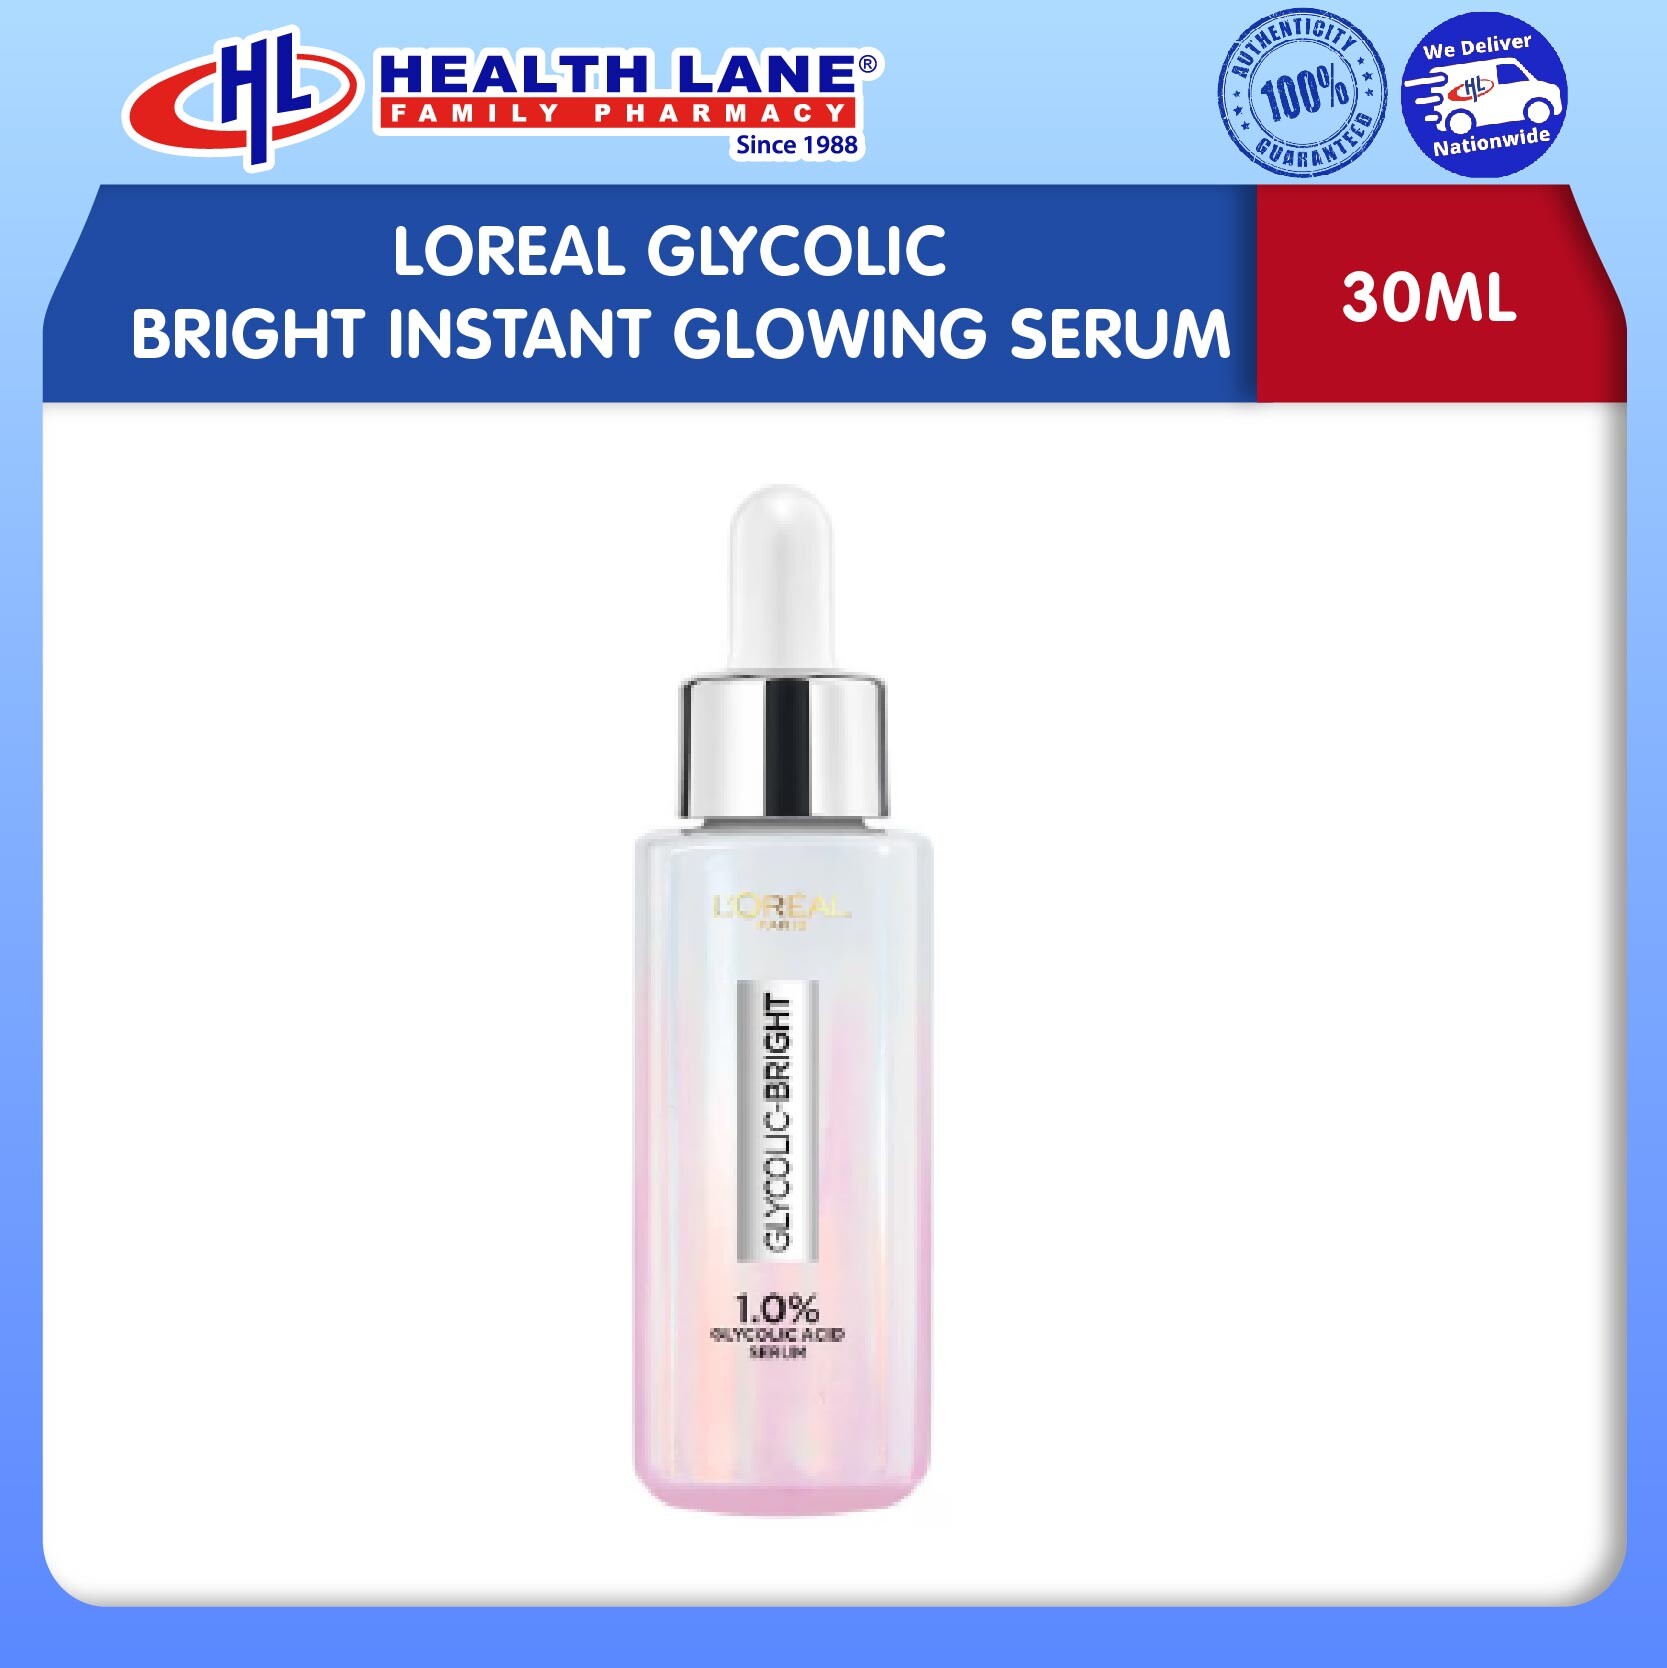 LOREAL GLYCOLIC BRIGHT INSTANT GLOWING SERUM (30ML)